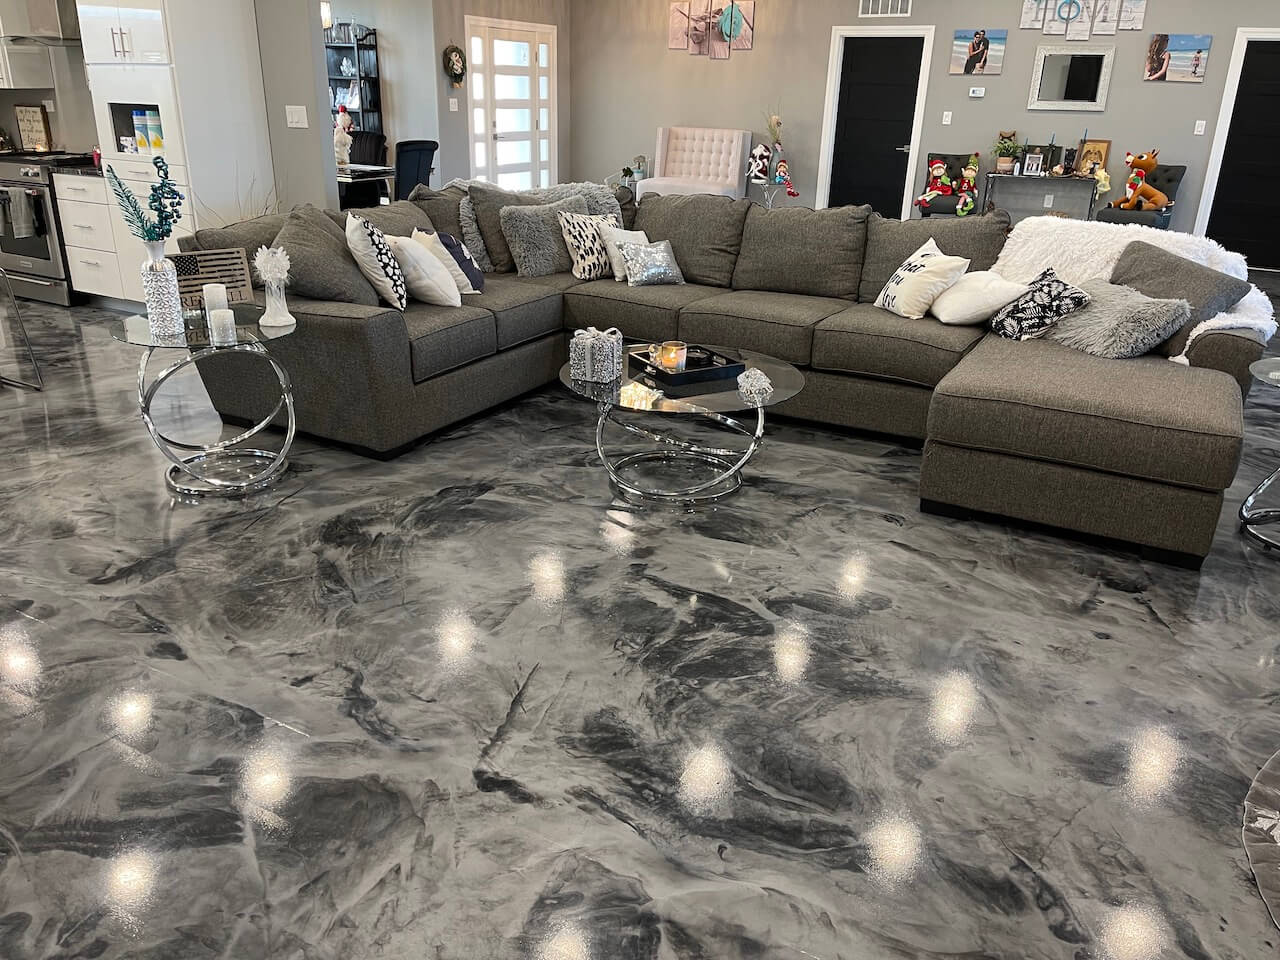 Gorgeous gray and black metallic epoxy floor in a home with a couch and tables.